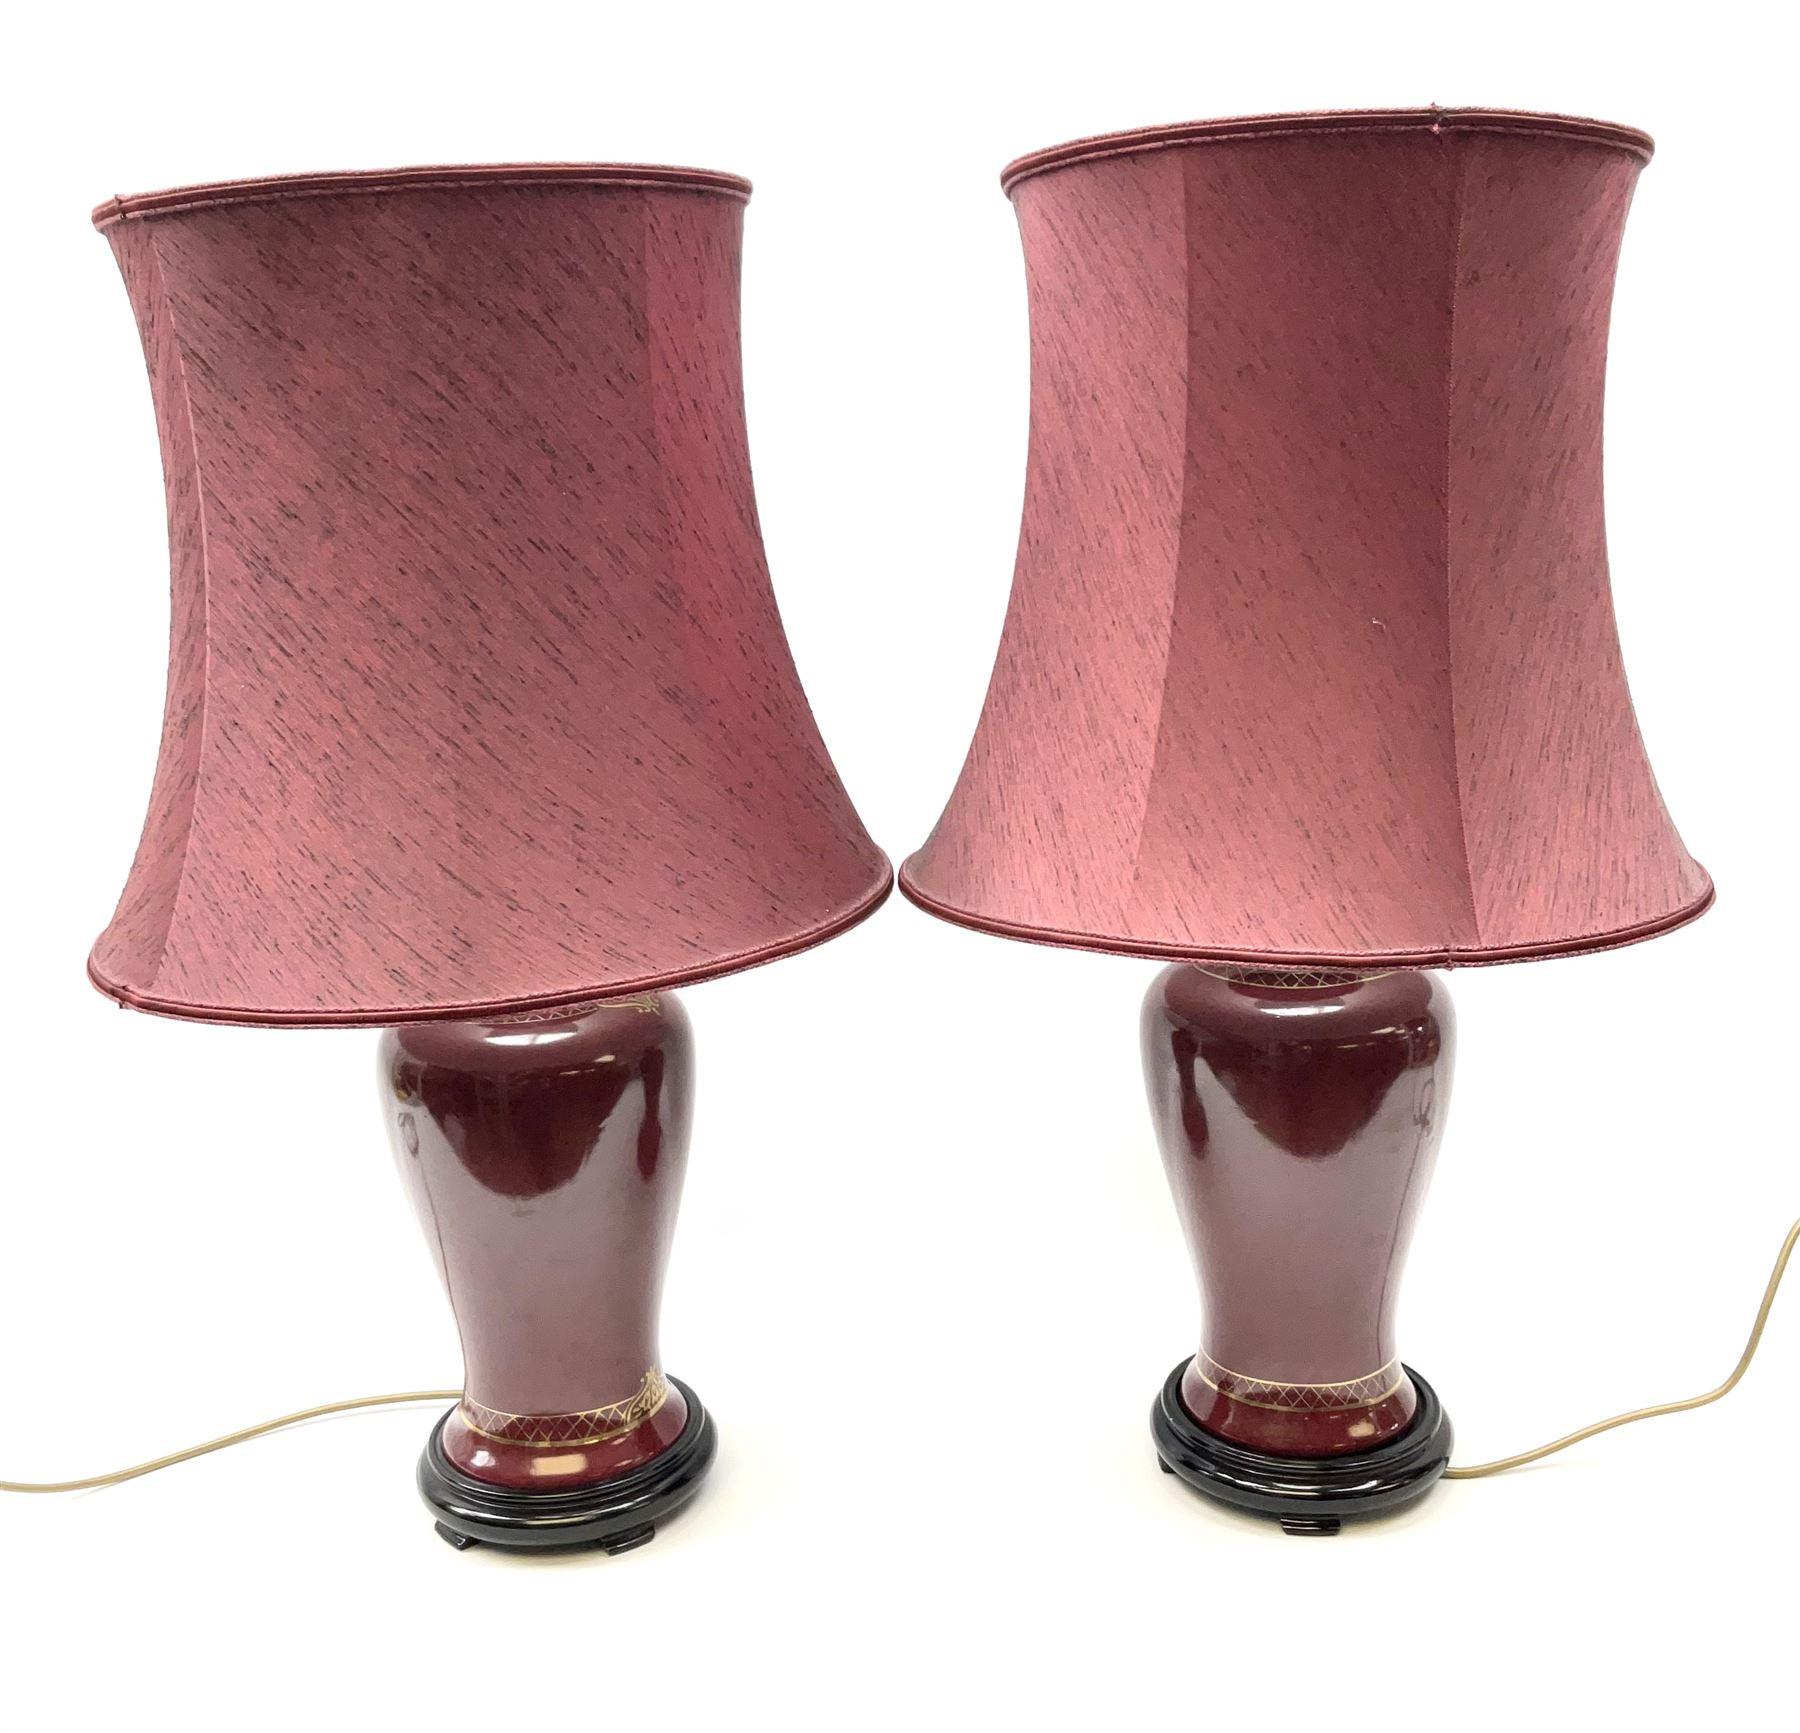 Pair of dark red table lamps in baluster form with a round wooden base